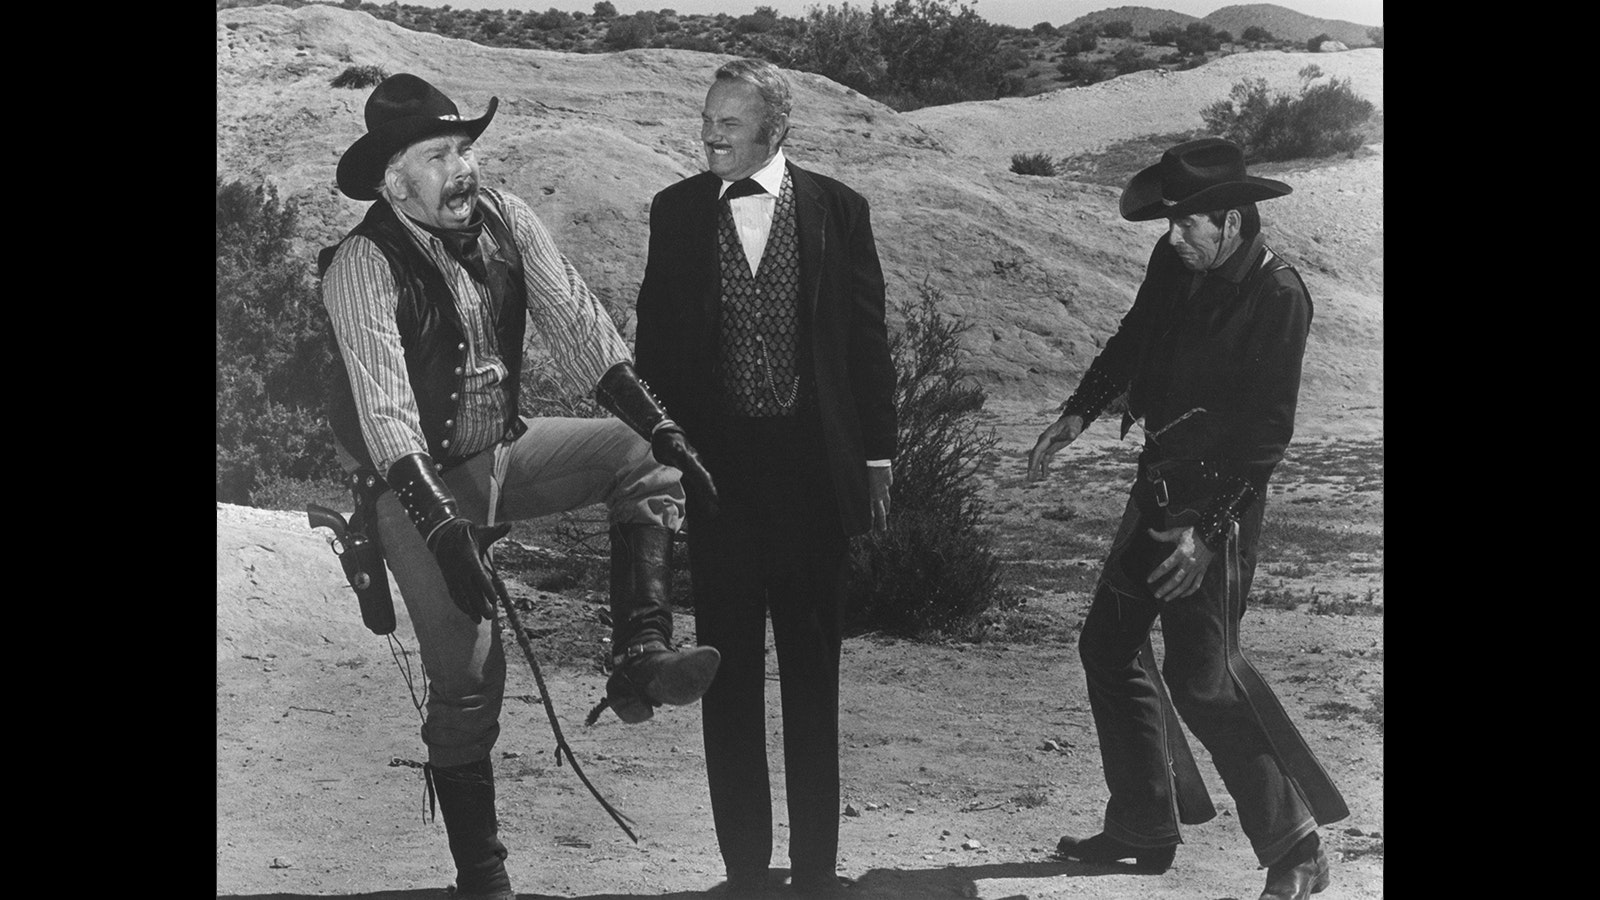 Slim Pickens, Harvey Korman and Burton Gilliam in a scene from the classic 1974 Mel Brooks comedy Western "Blazing Saddles." Pickens played the bumbling cowboy boss Taggart.